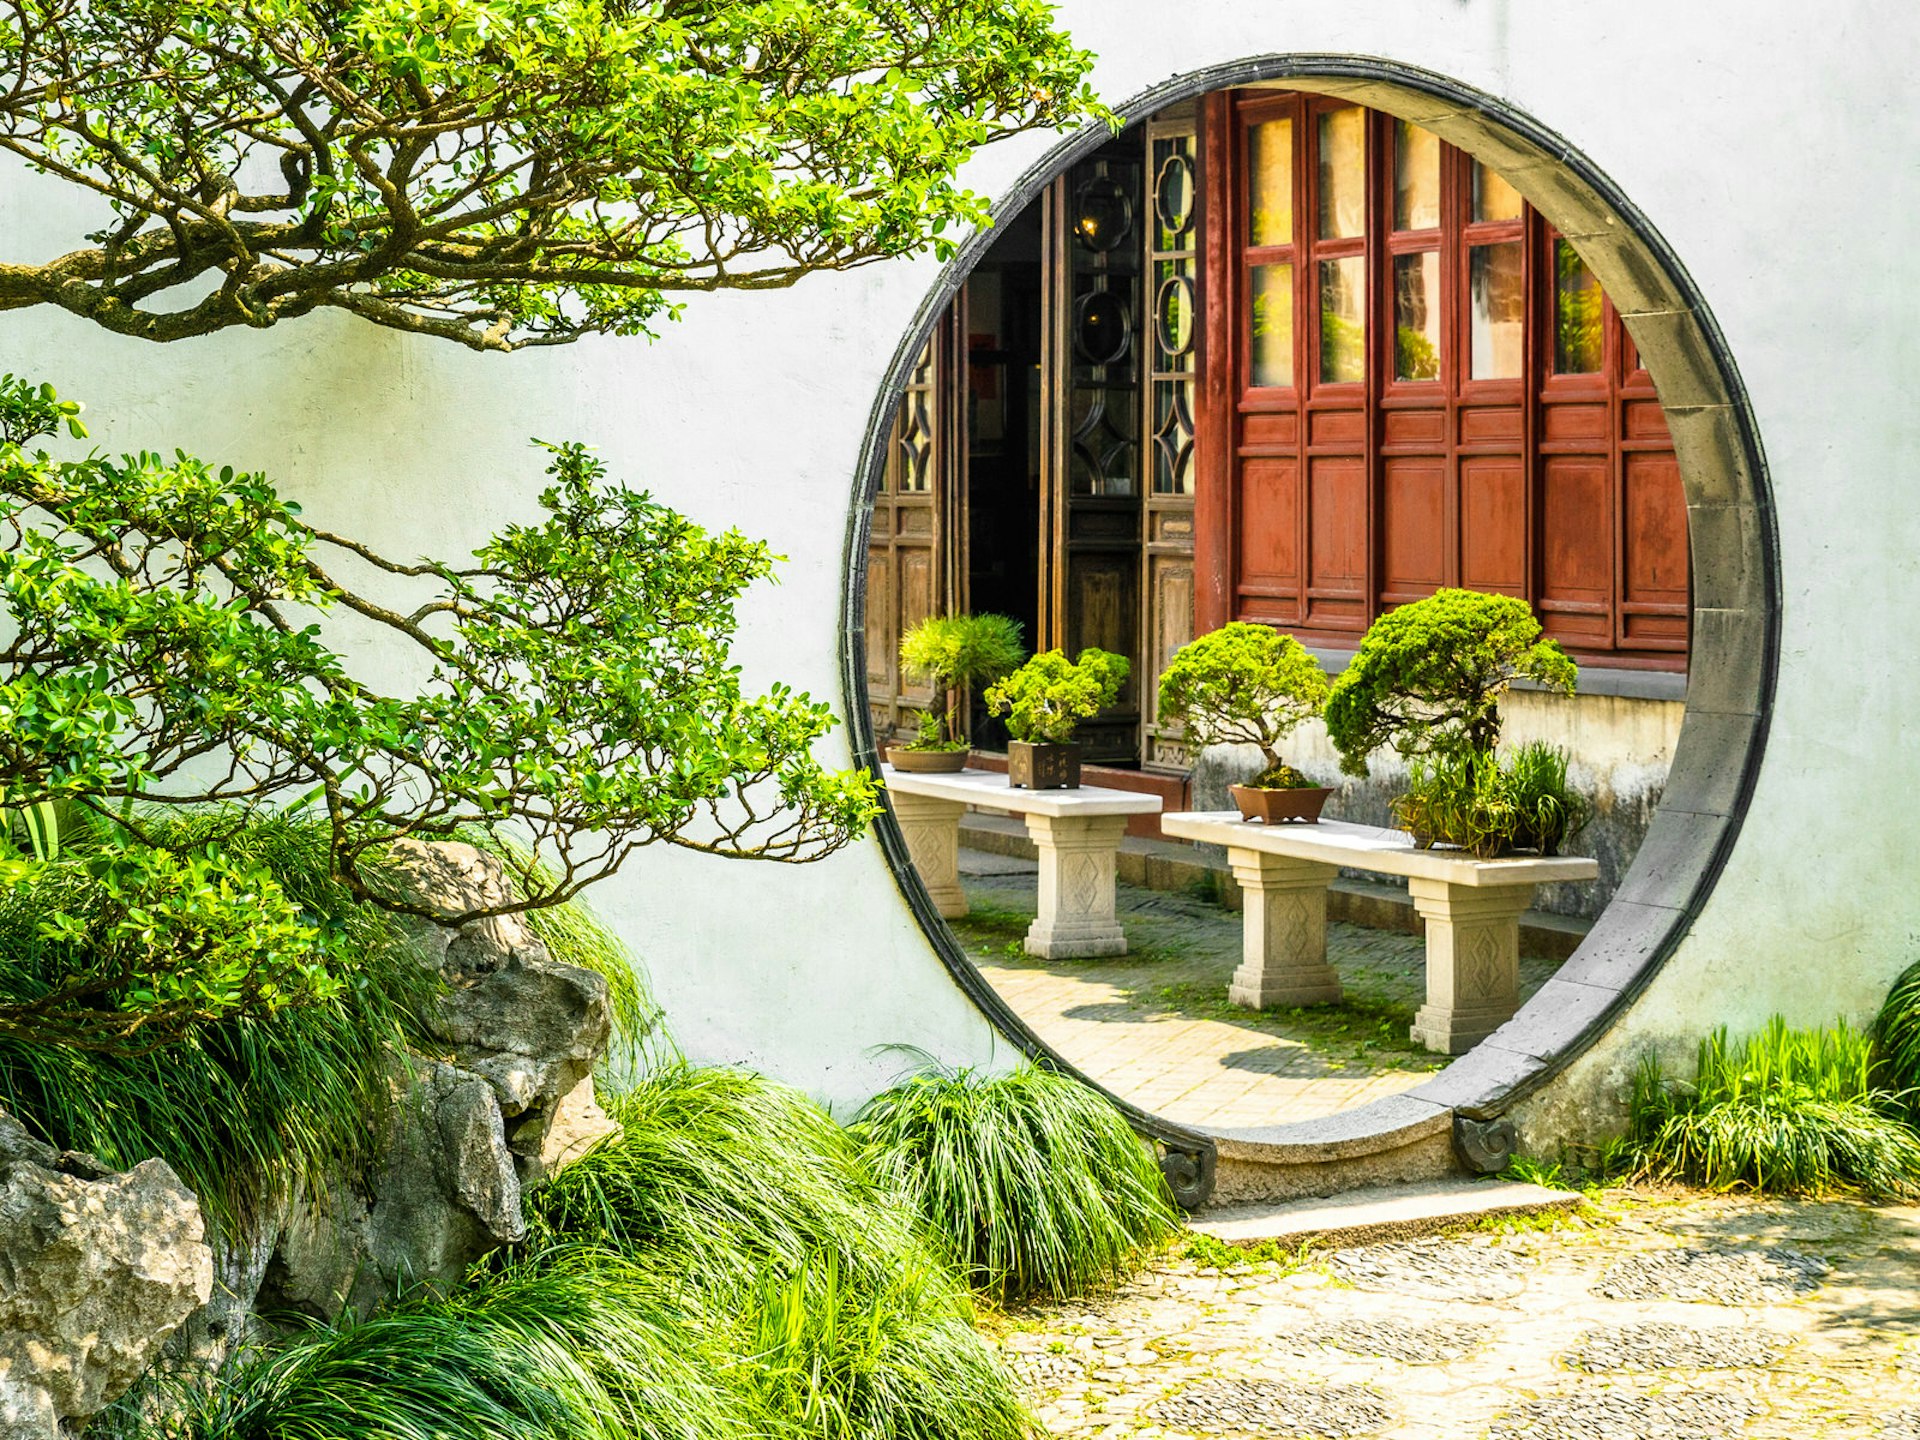 A round moon gate surrounded by white walls and green trees in Suzhou's the Garden of the Master of the Nets © Zharov Pavel / Shutterstock